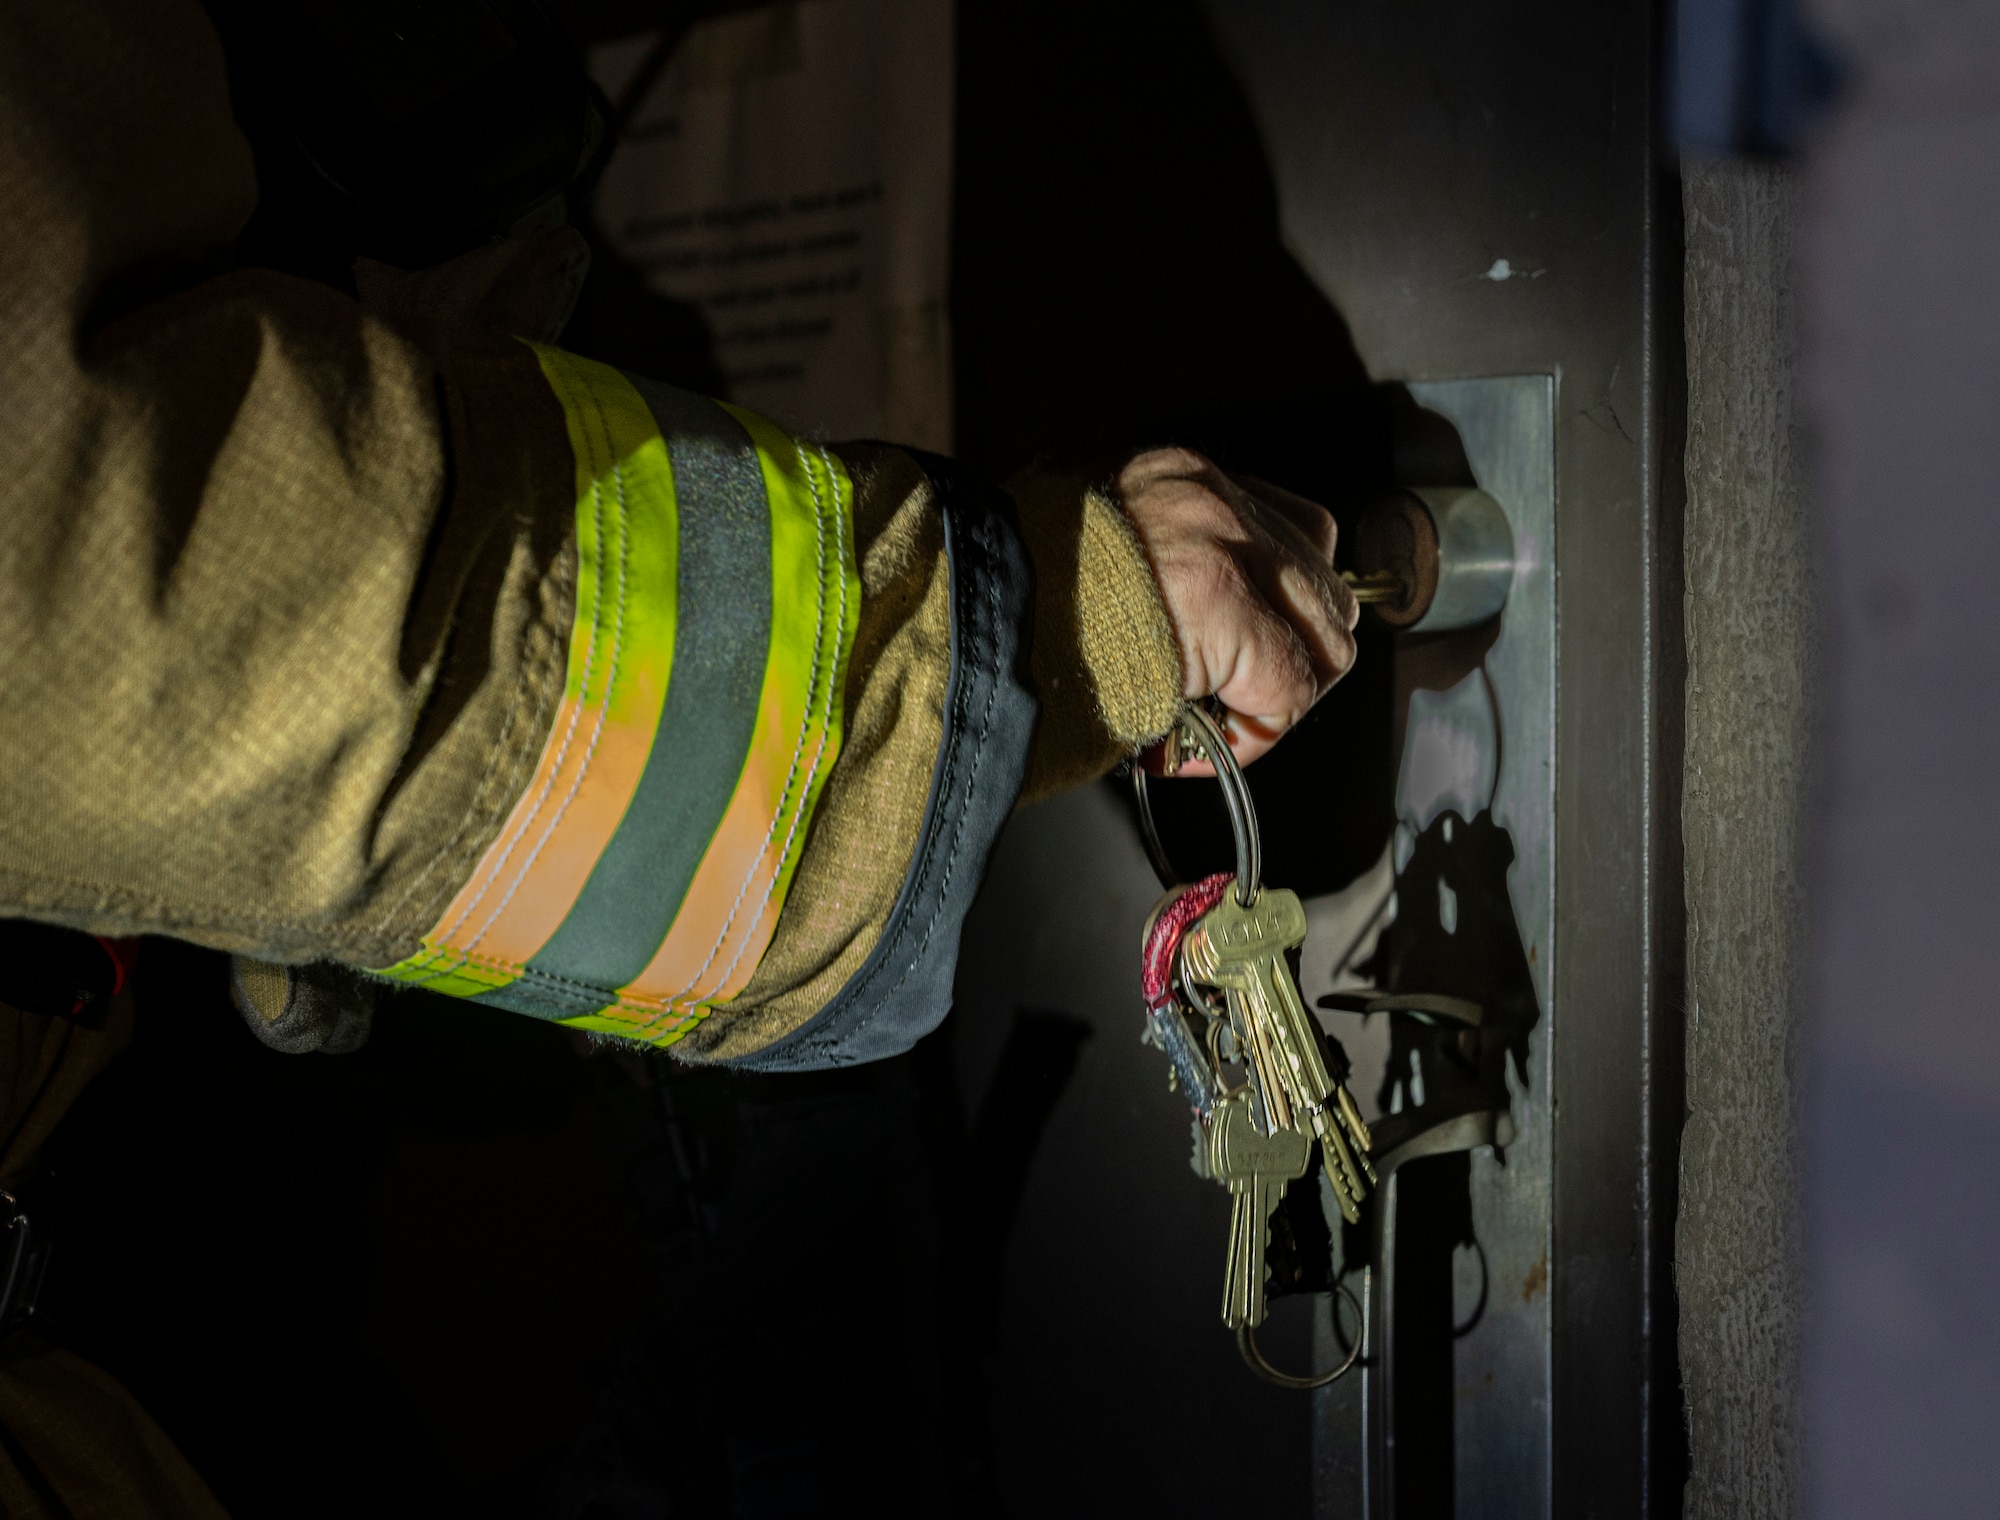 U.S. Air Force Staff Sgt. Larry Mciver, 51st Civil Engineer Squadron lead firefighter, opens the door to a simulated burning building during a wing training event at Osan Air Base, Republic of Korea, Sept. 14, 2022.